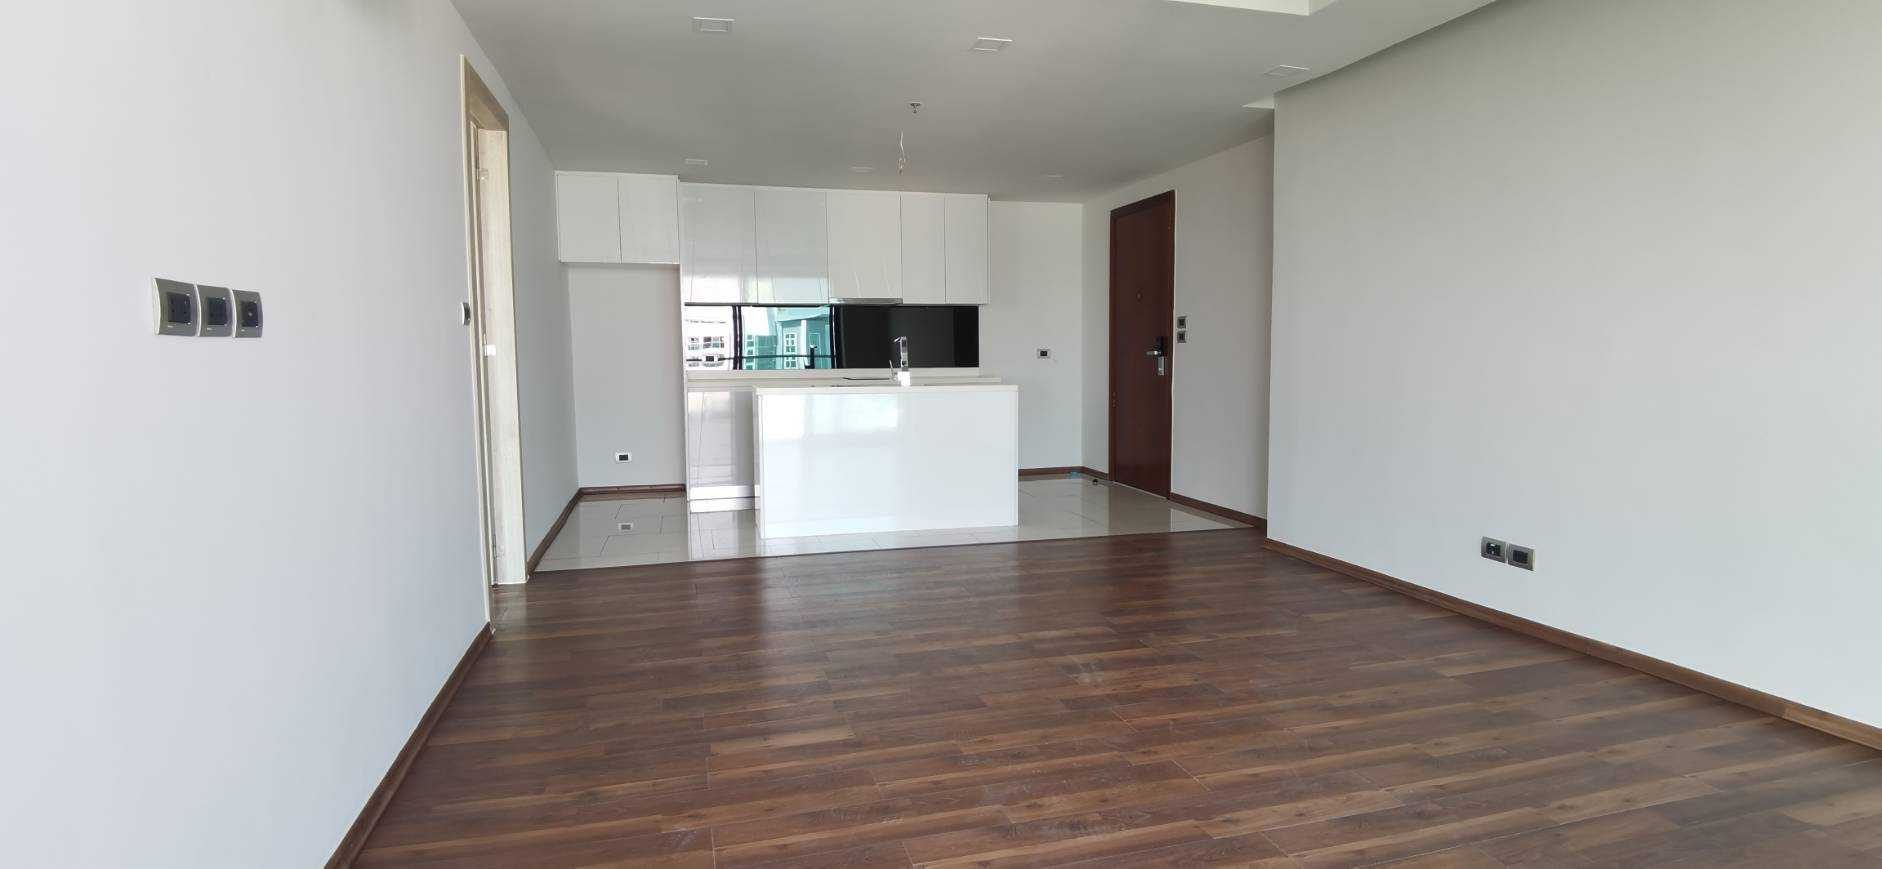 PBRE Asia Pacific Co., Ltd Agency's 1 Bed The Peak Towers for Sale in Pratumnak 3